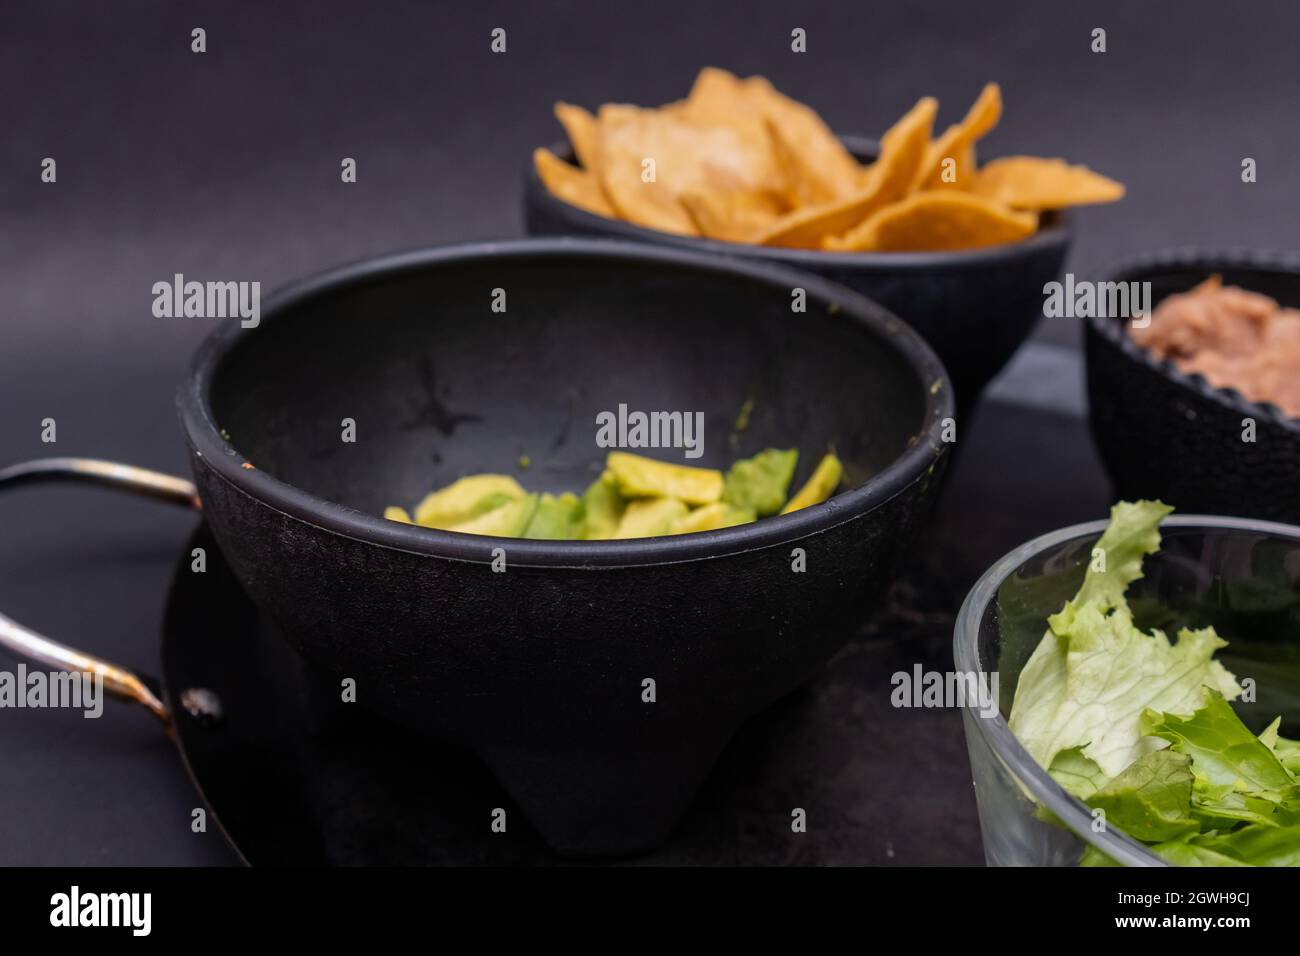 https://c8.alamy.com/comp/2GWH9CJ/bowls-of-tortilla-chips-refried-beans-and-chopped-lettuce-on-mexican-comal-2GWH9CJ.jpg